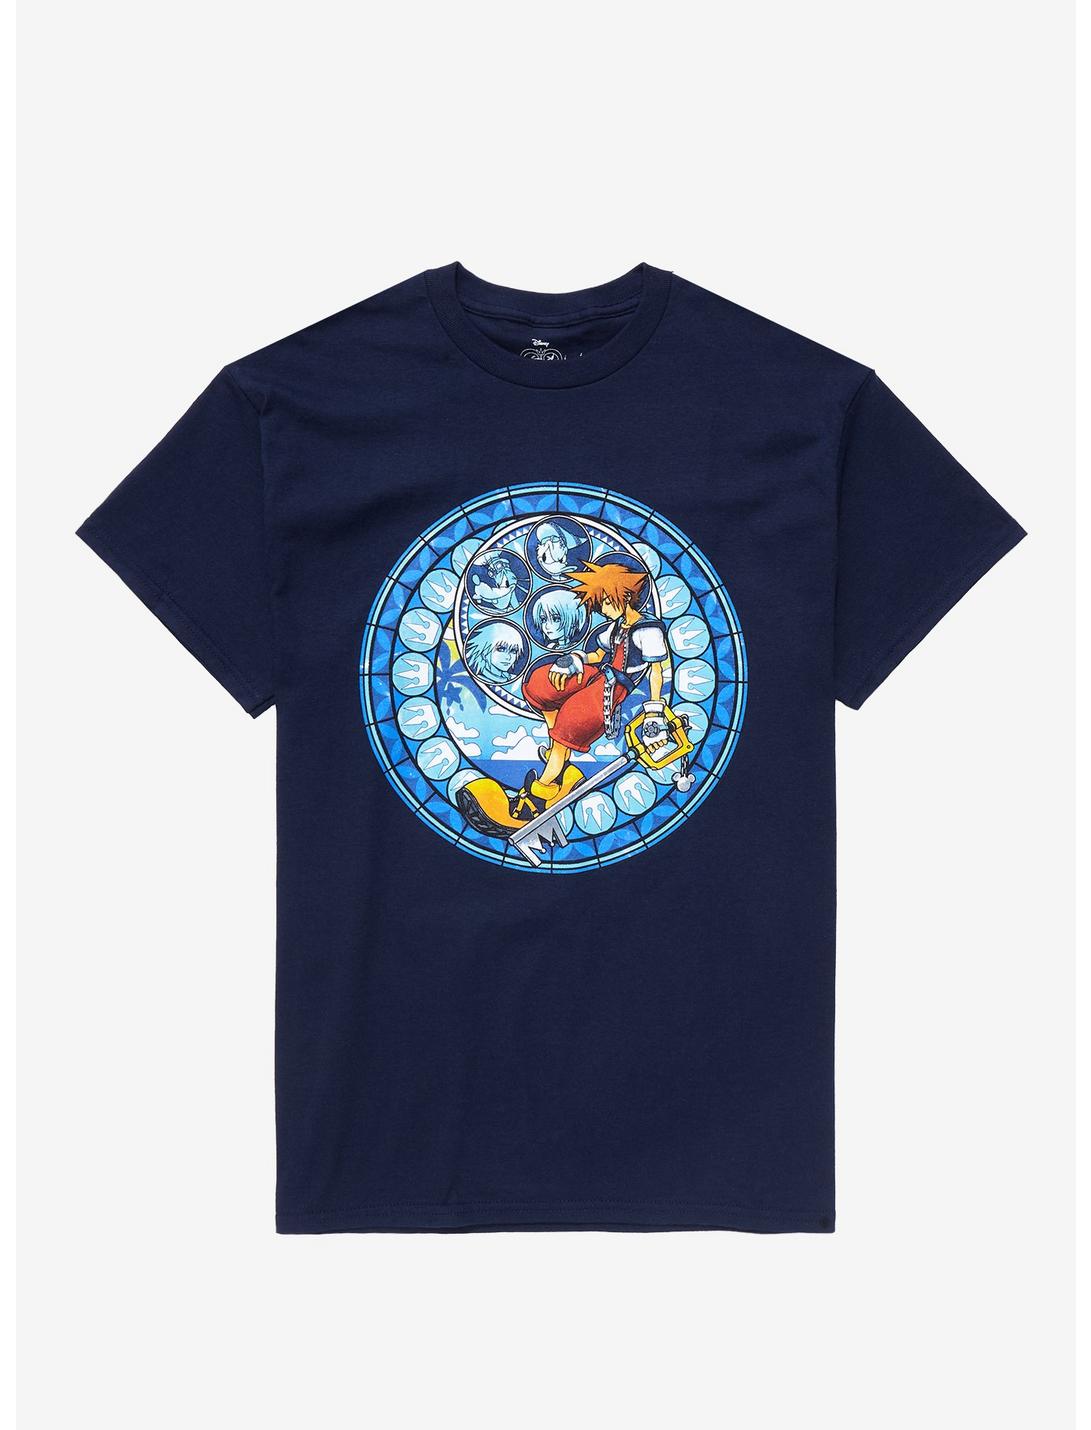 Disney Kingdom Hearts Stained Glass T-Shirt, NAVY, hi-res